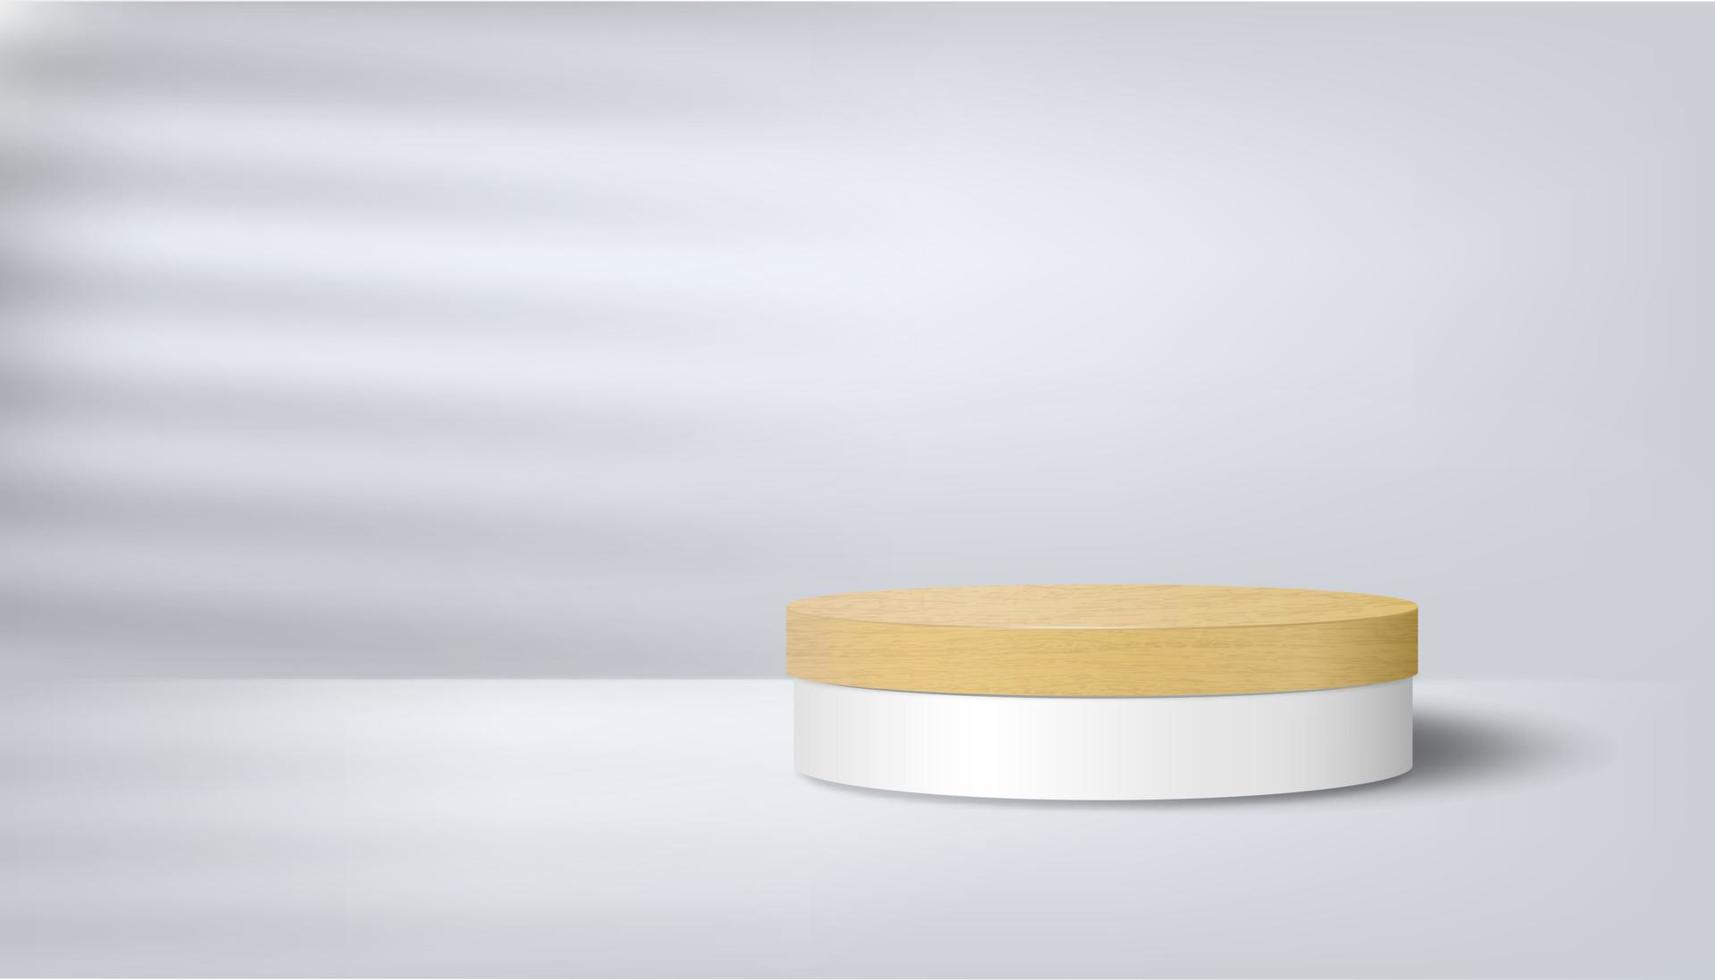 Abstract minimalistic stage with a wooden podium on a white background with shadows. product presentation, layout, demonstration of cosmetic products, stage pedestal or platform. 3d vector